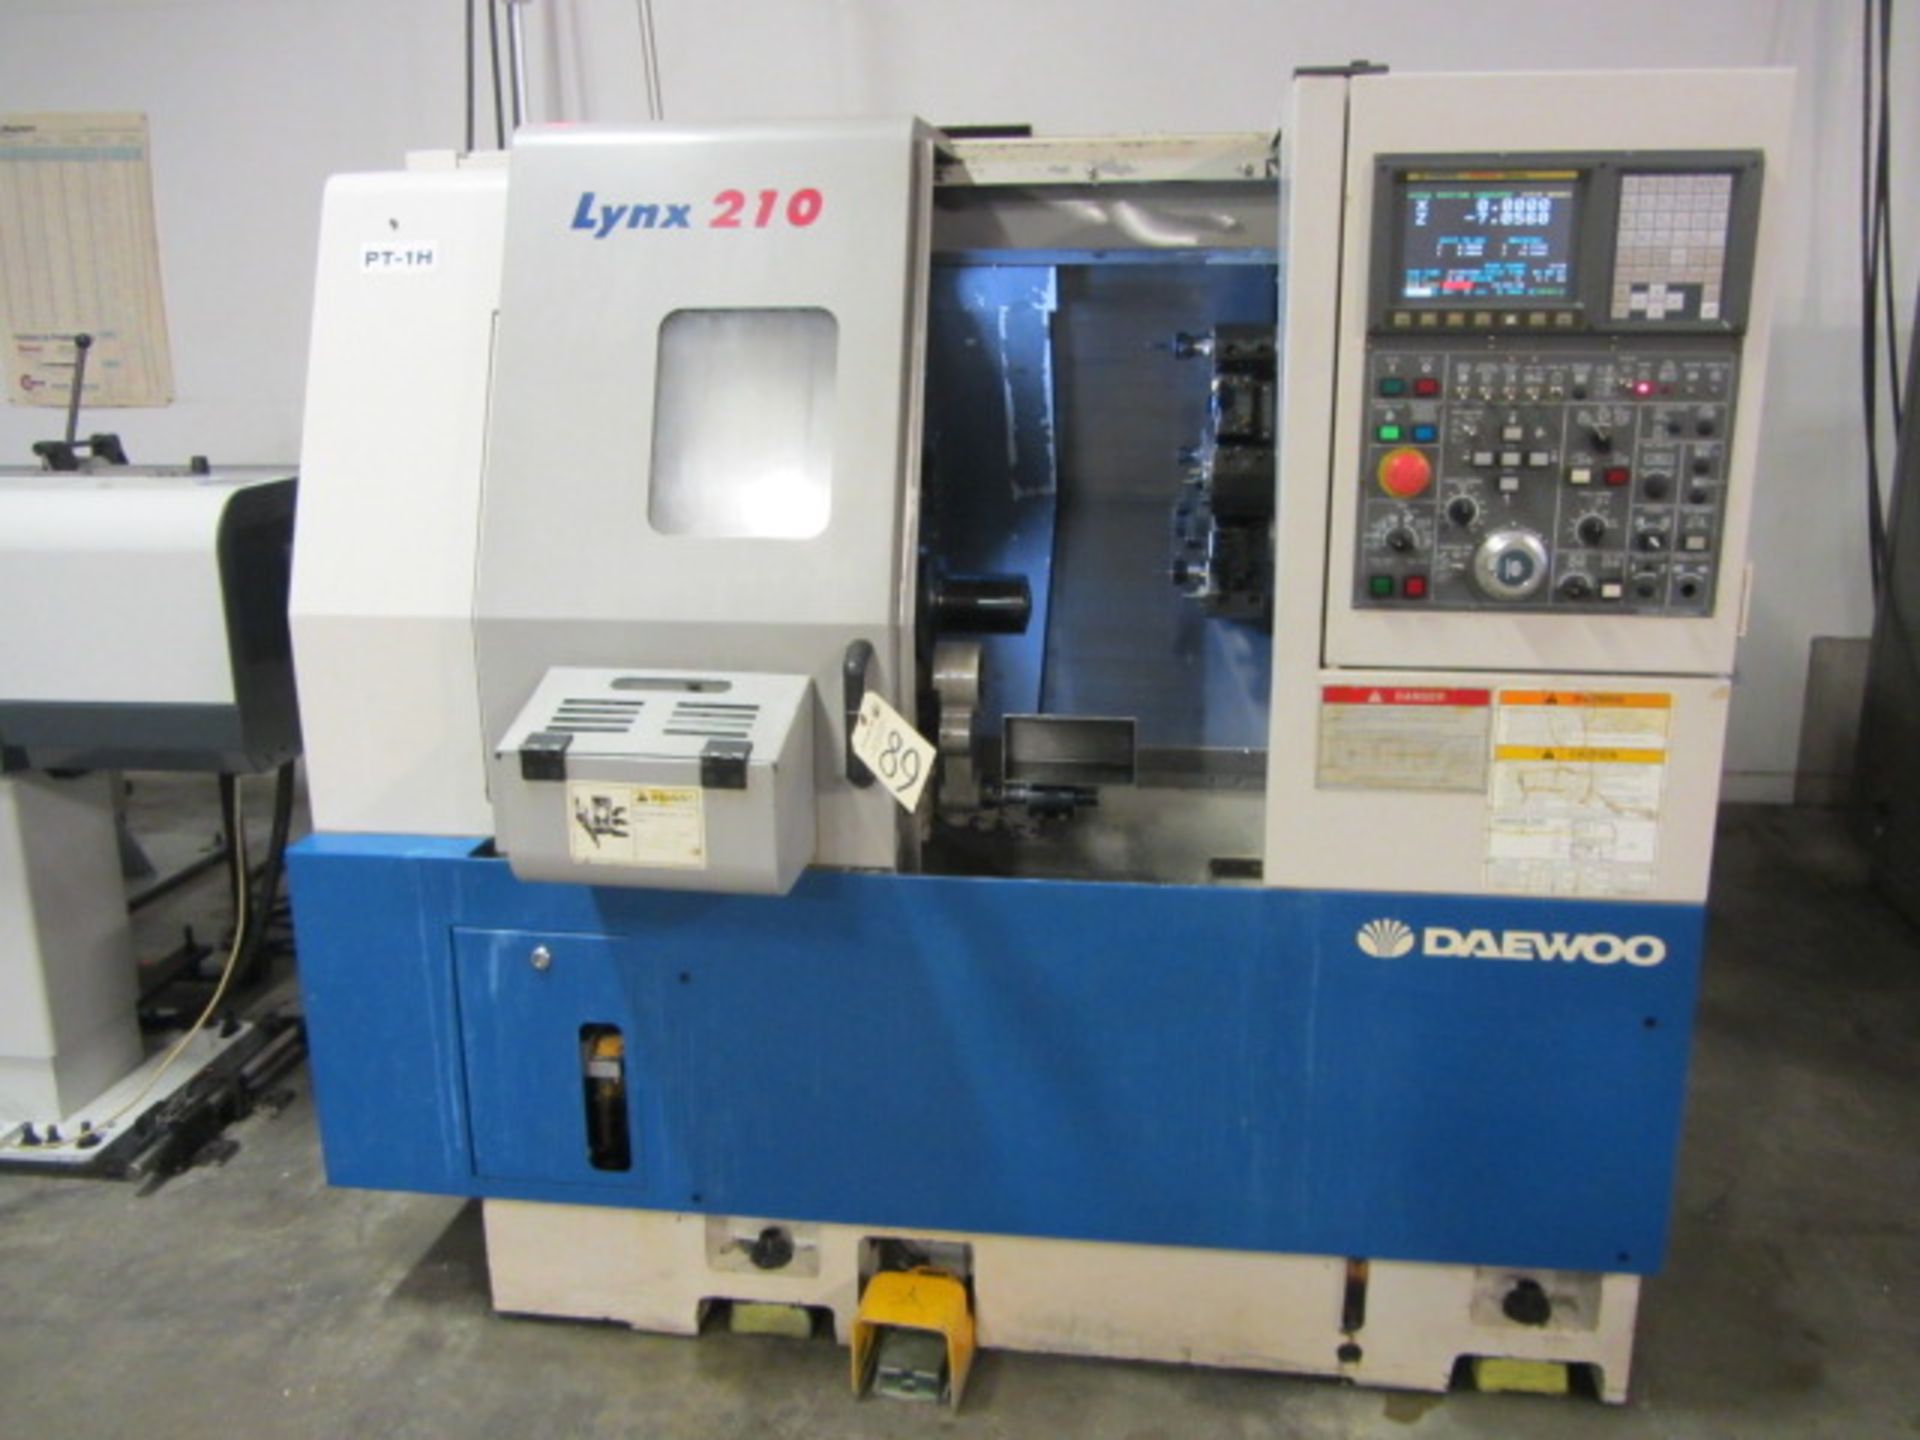 Daewoo Lynx 210A CNC Turning Center with 16C Collet Chuck, Parts Catcher, Fanuc i CNC Control, sn: - Image 2 of 7